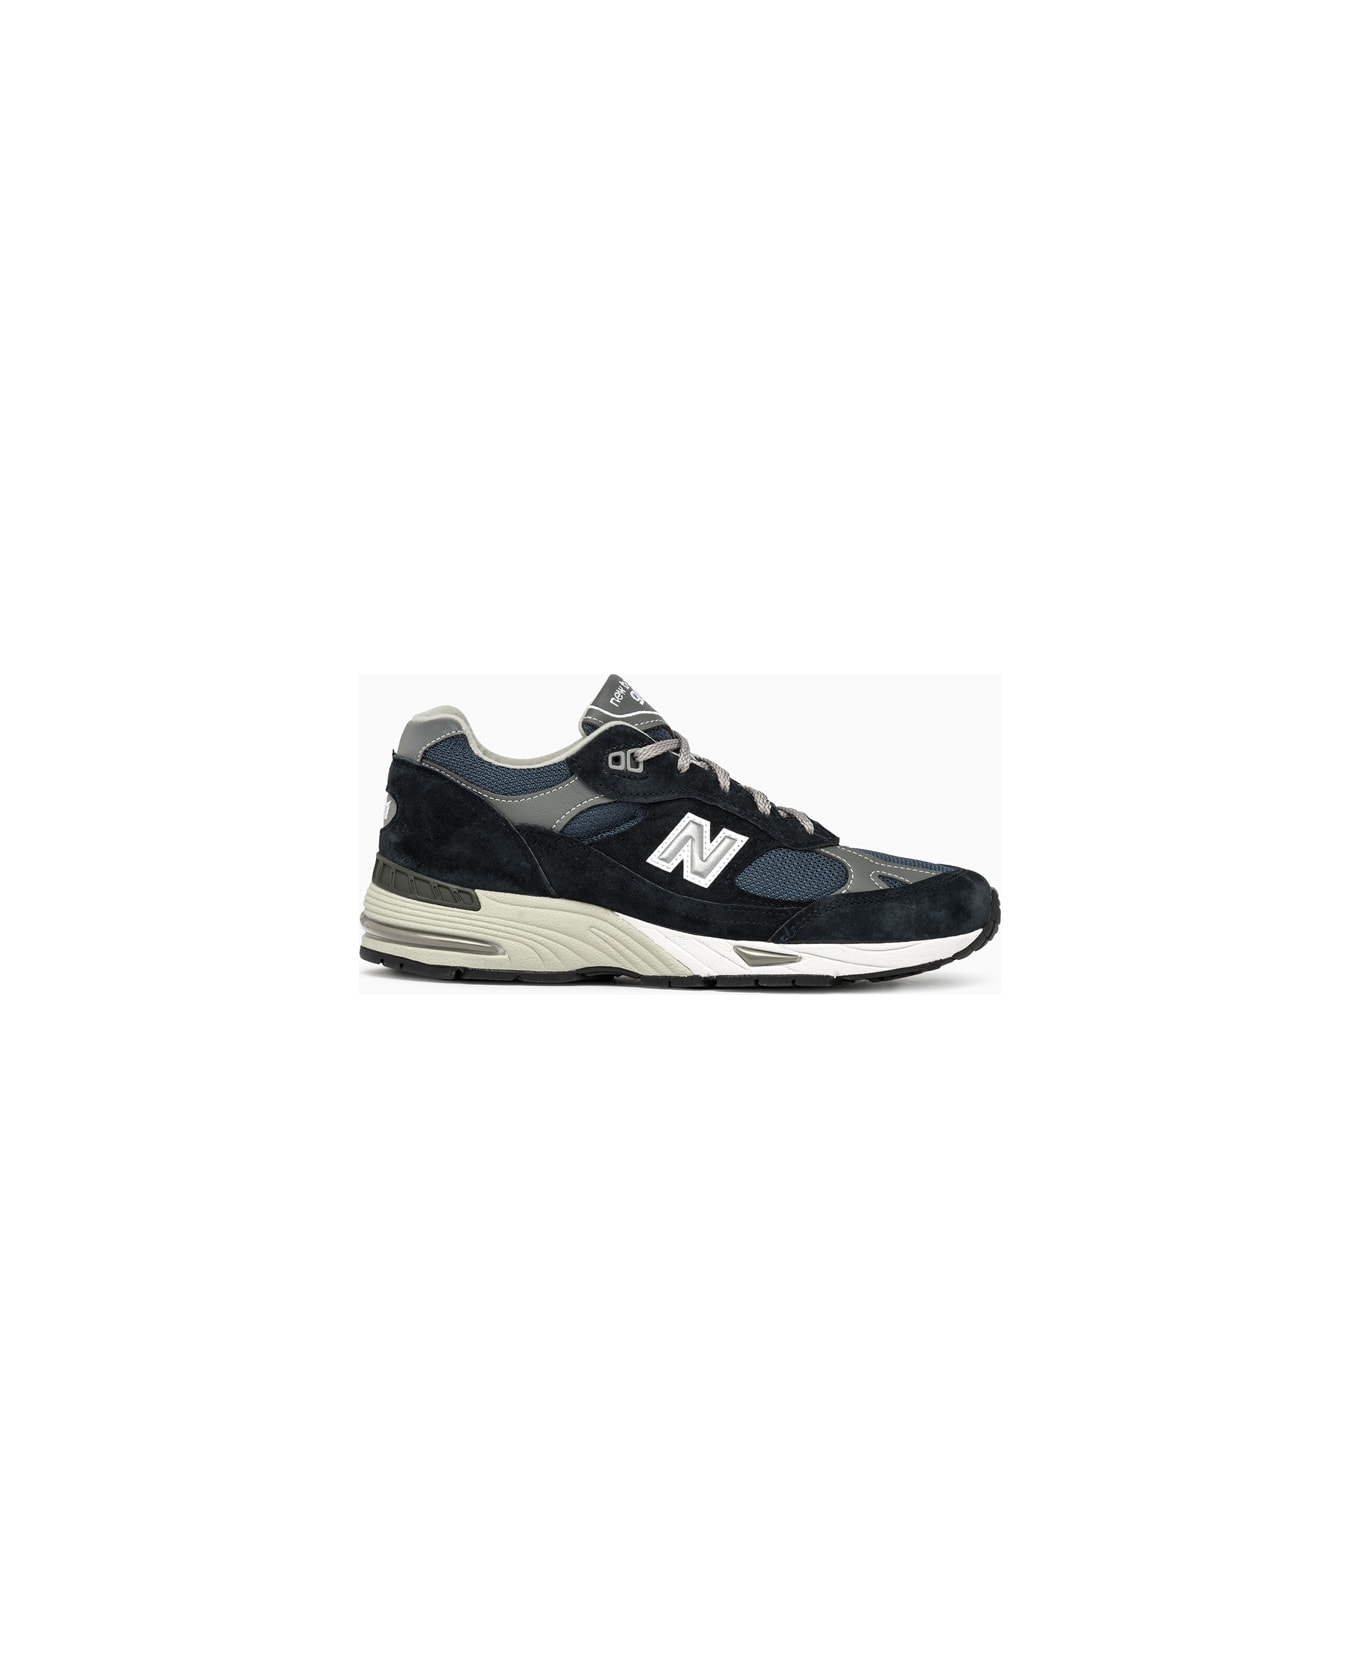 New Balance 991v1 Made In Uk Sneakers W991nv - Blue